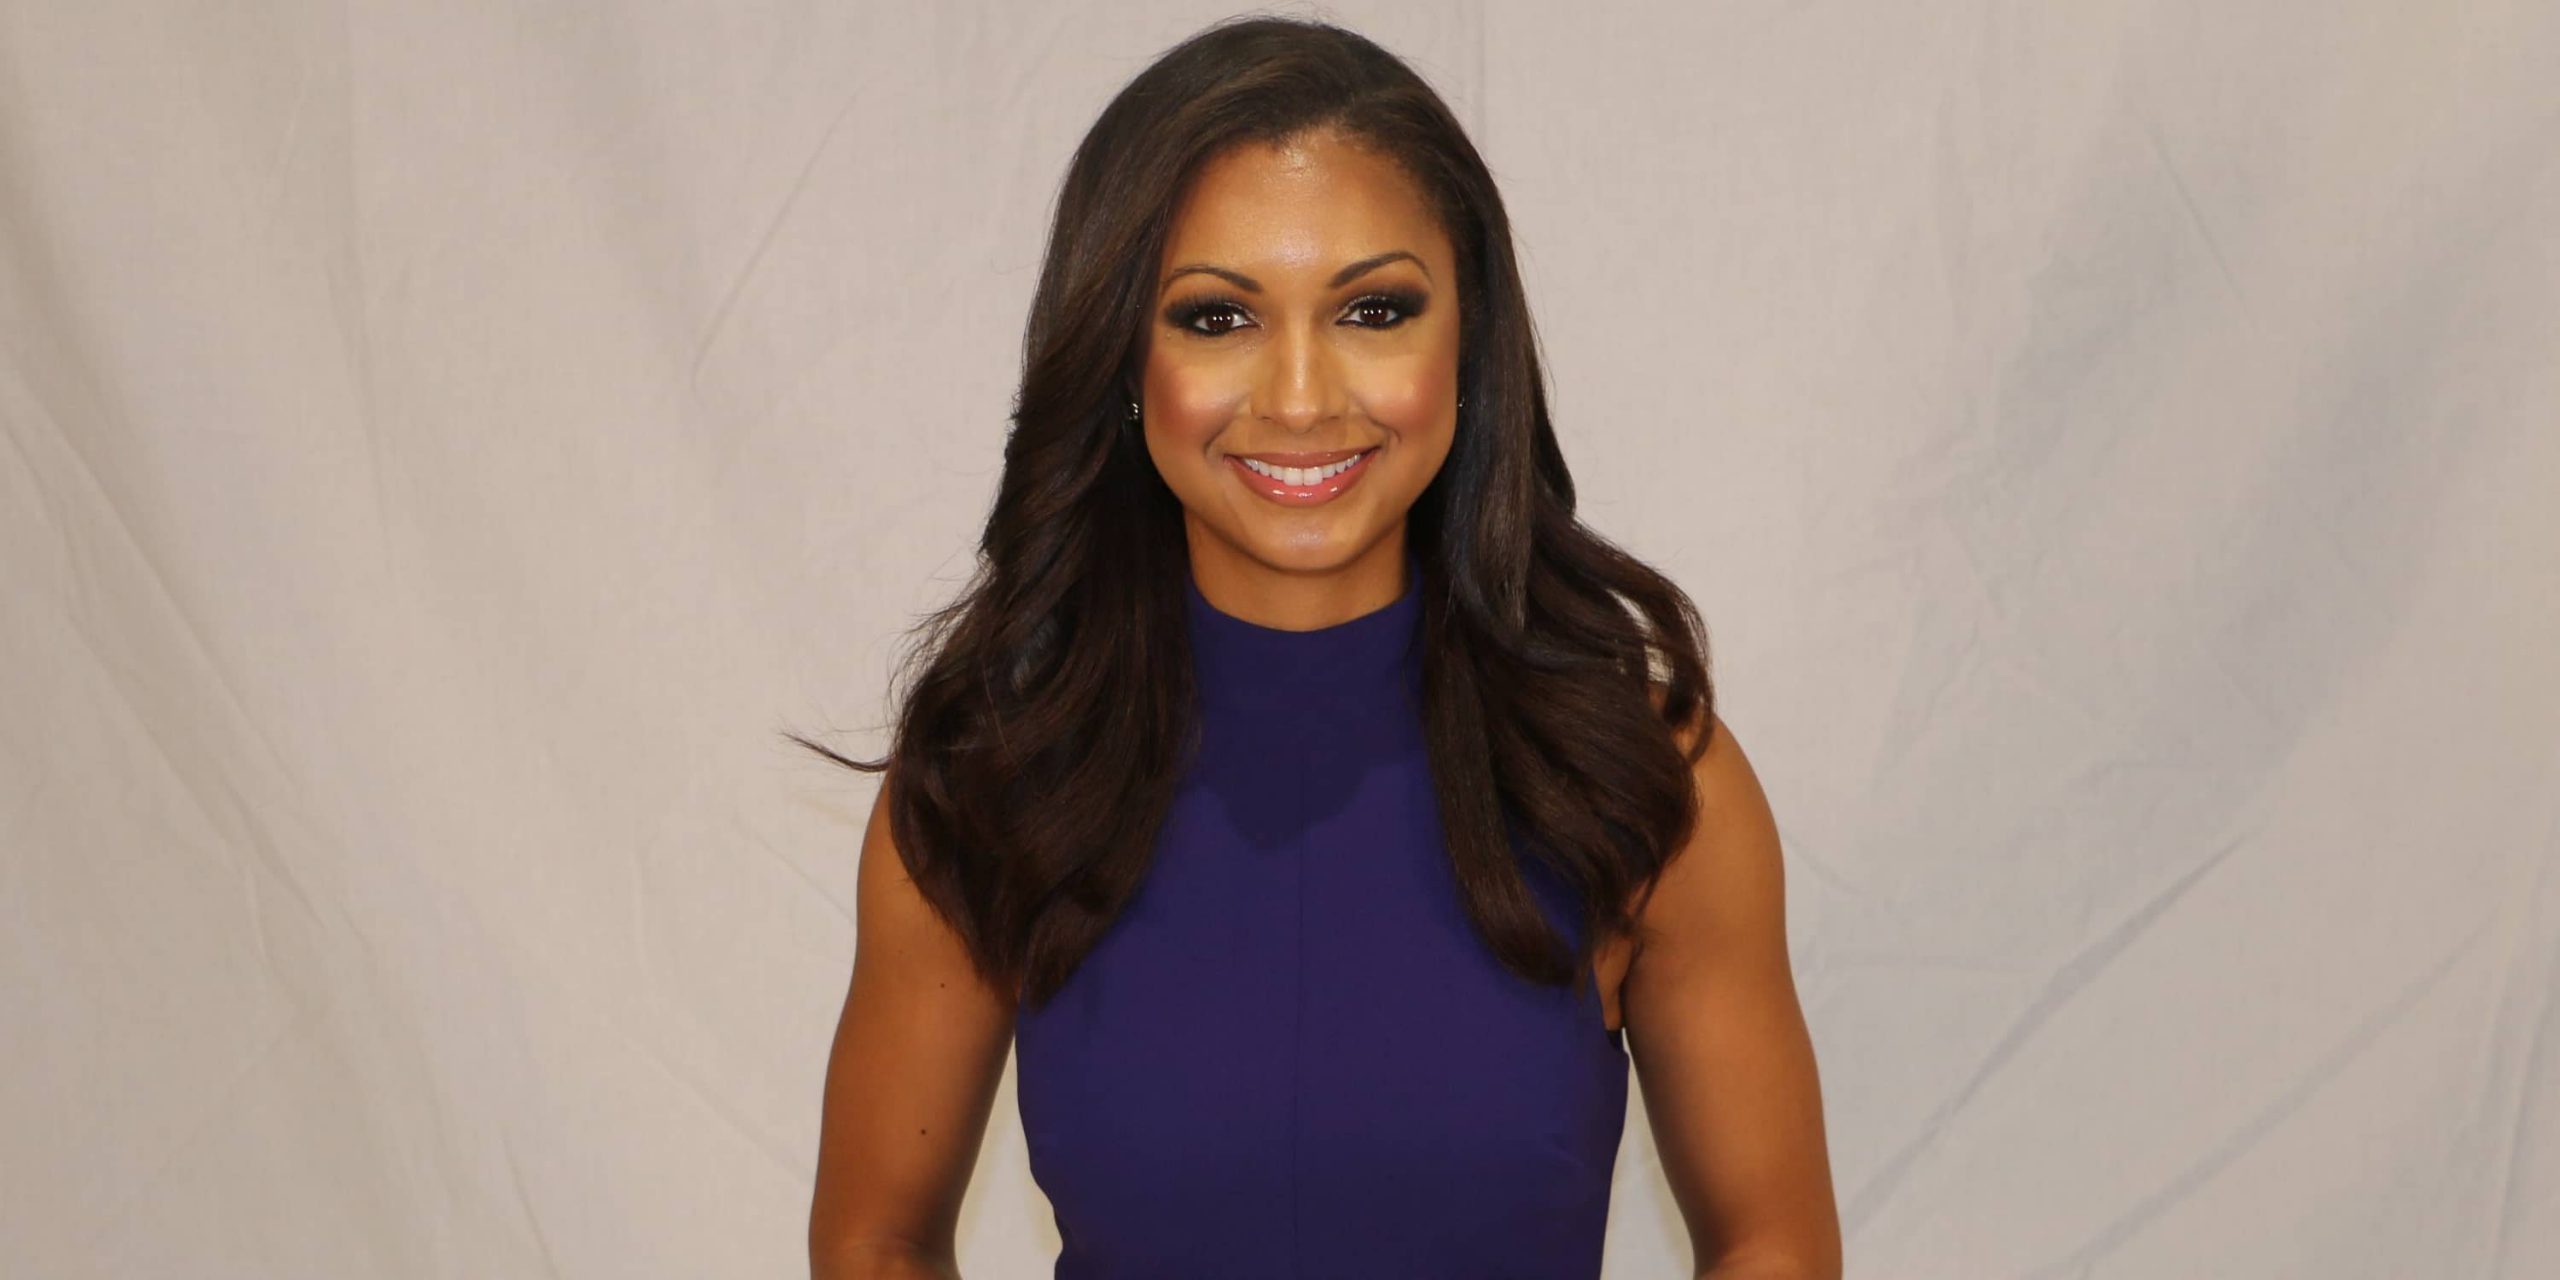 Contents1 Who is Fox’s Eboni K. Williams?2 Net Worth and Salary3 Early Life